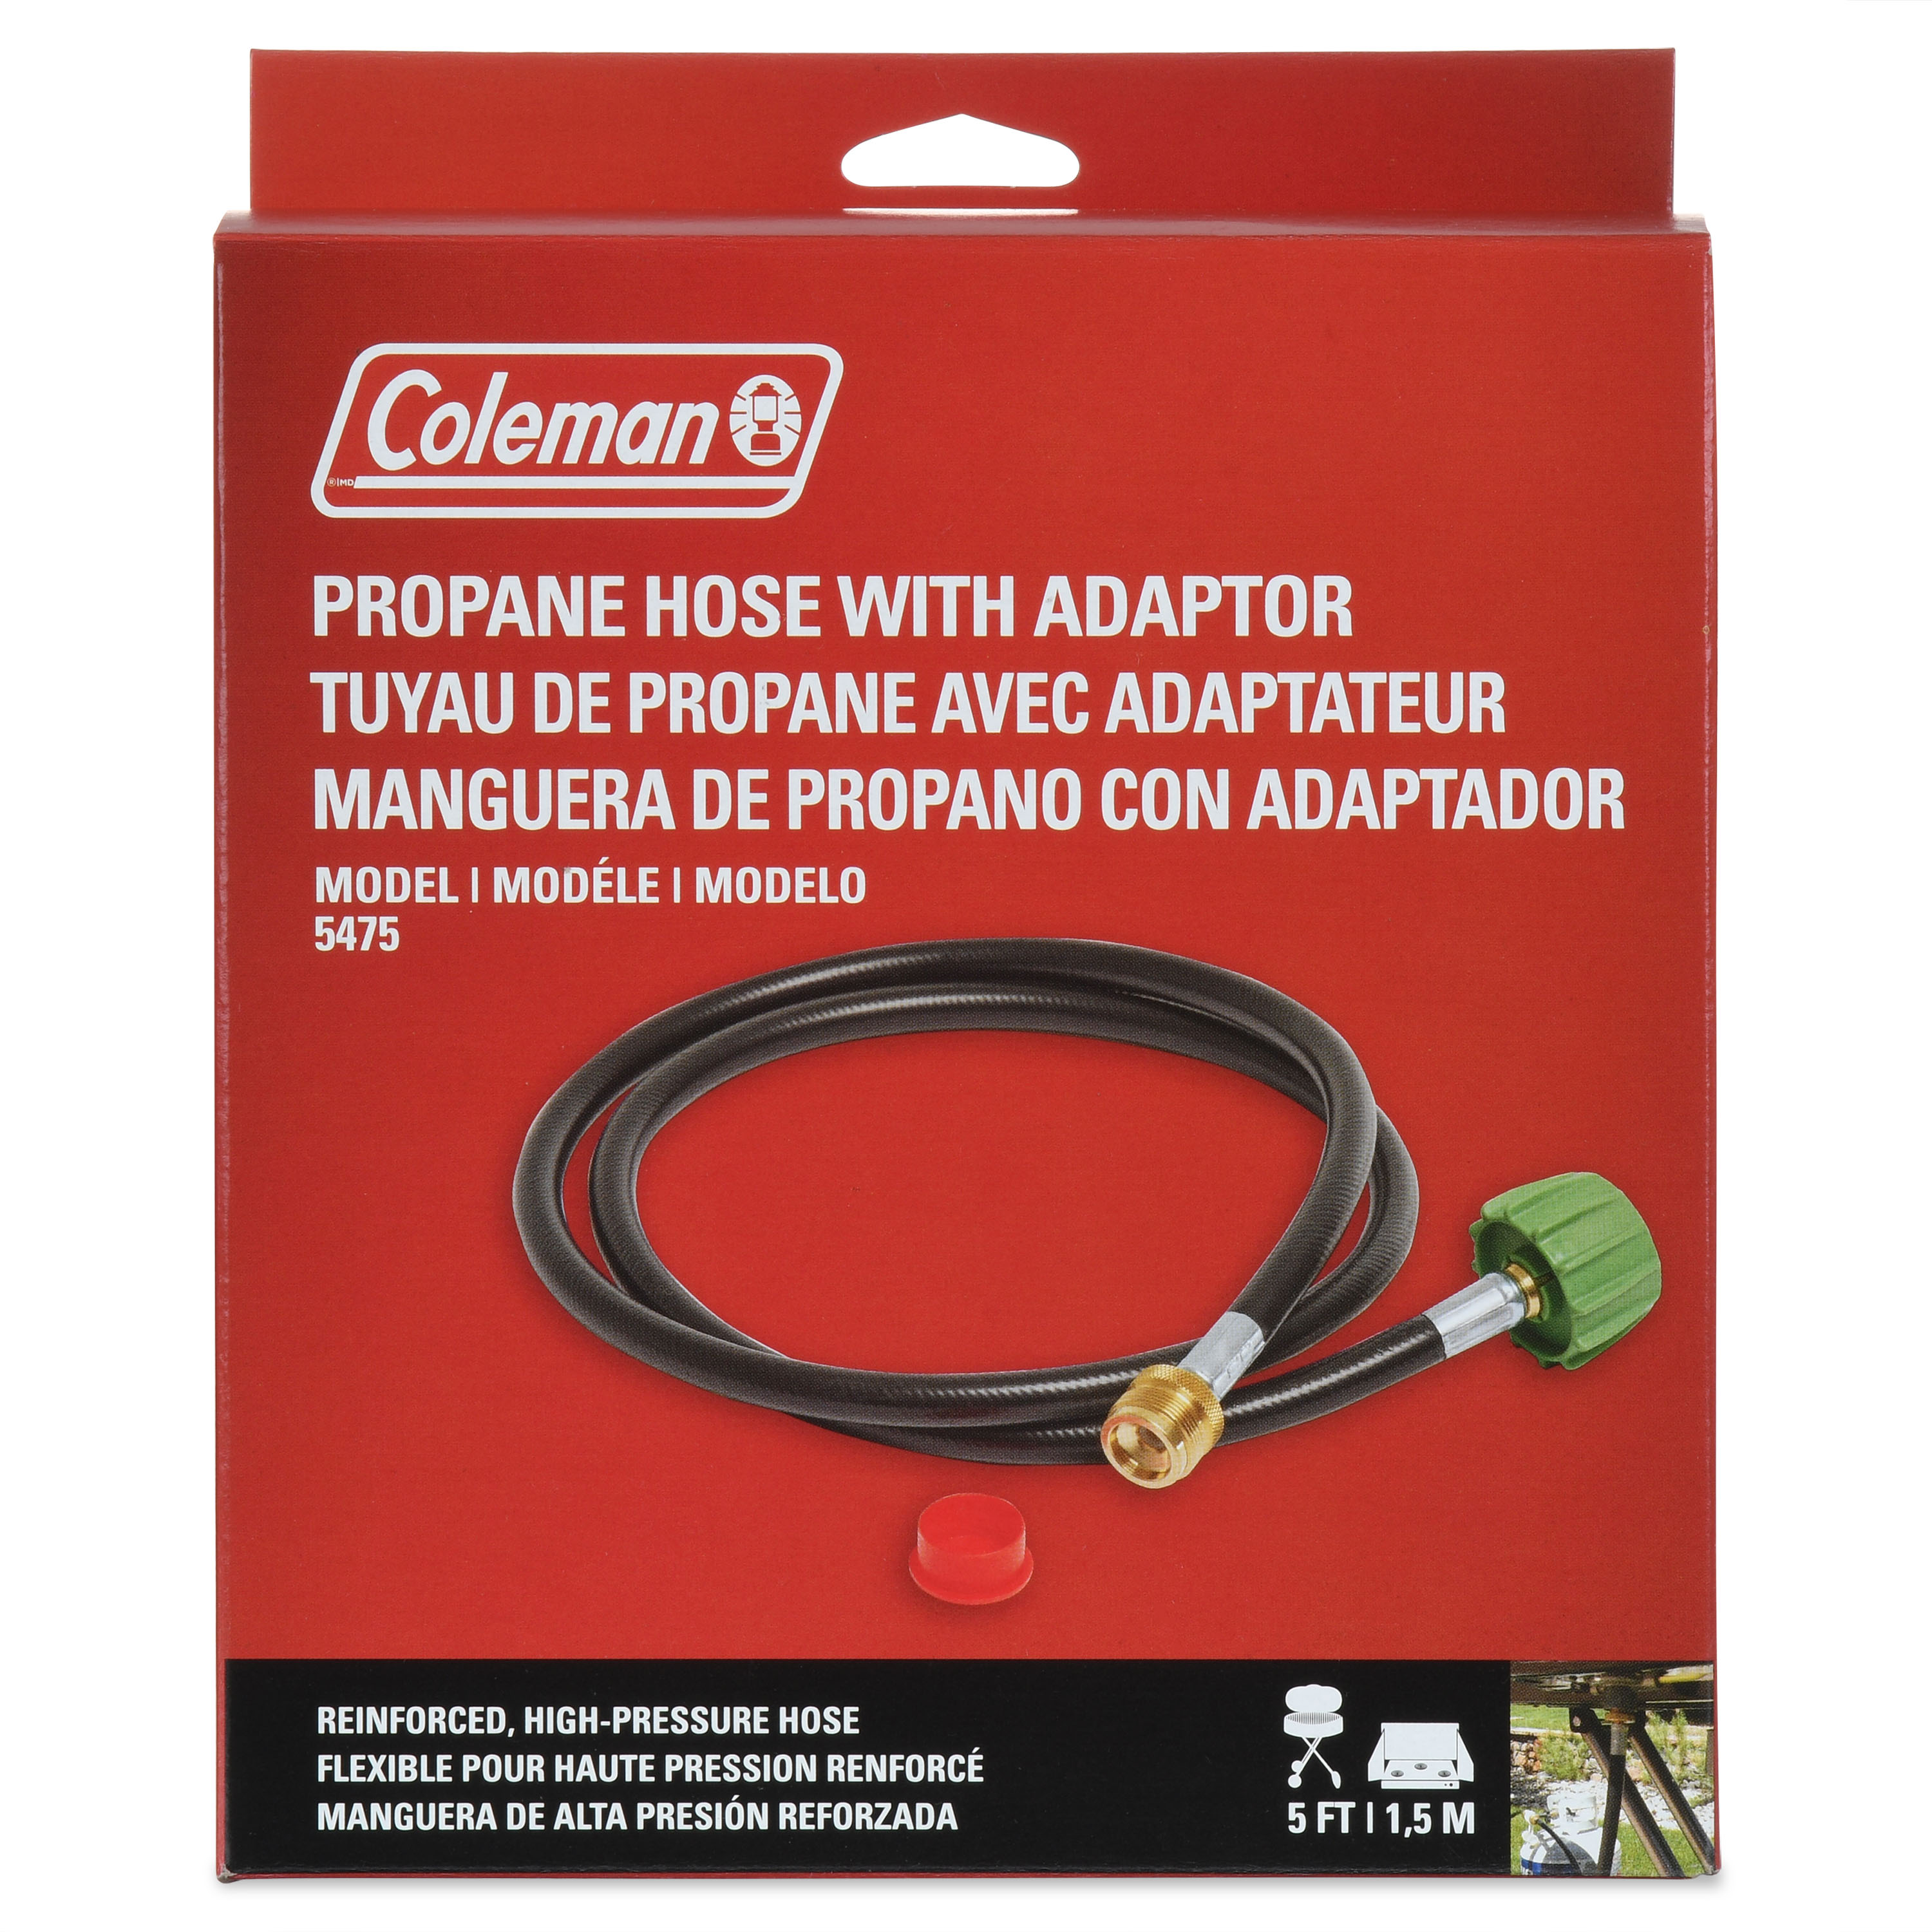 Coleman High-Pressure Propane Gas Hose and Adapter, 5' long , 1 Count - image 1 of 4